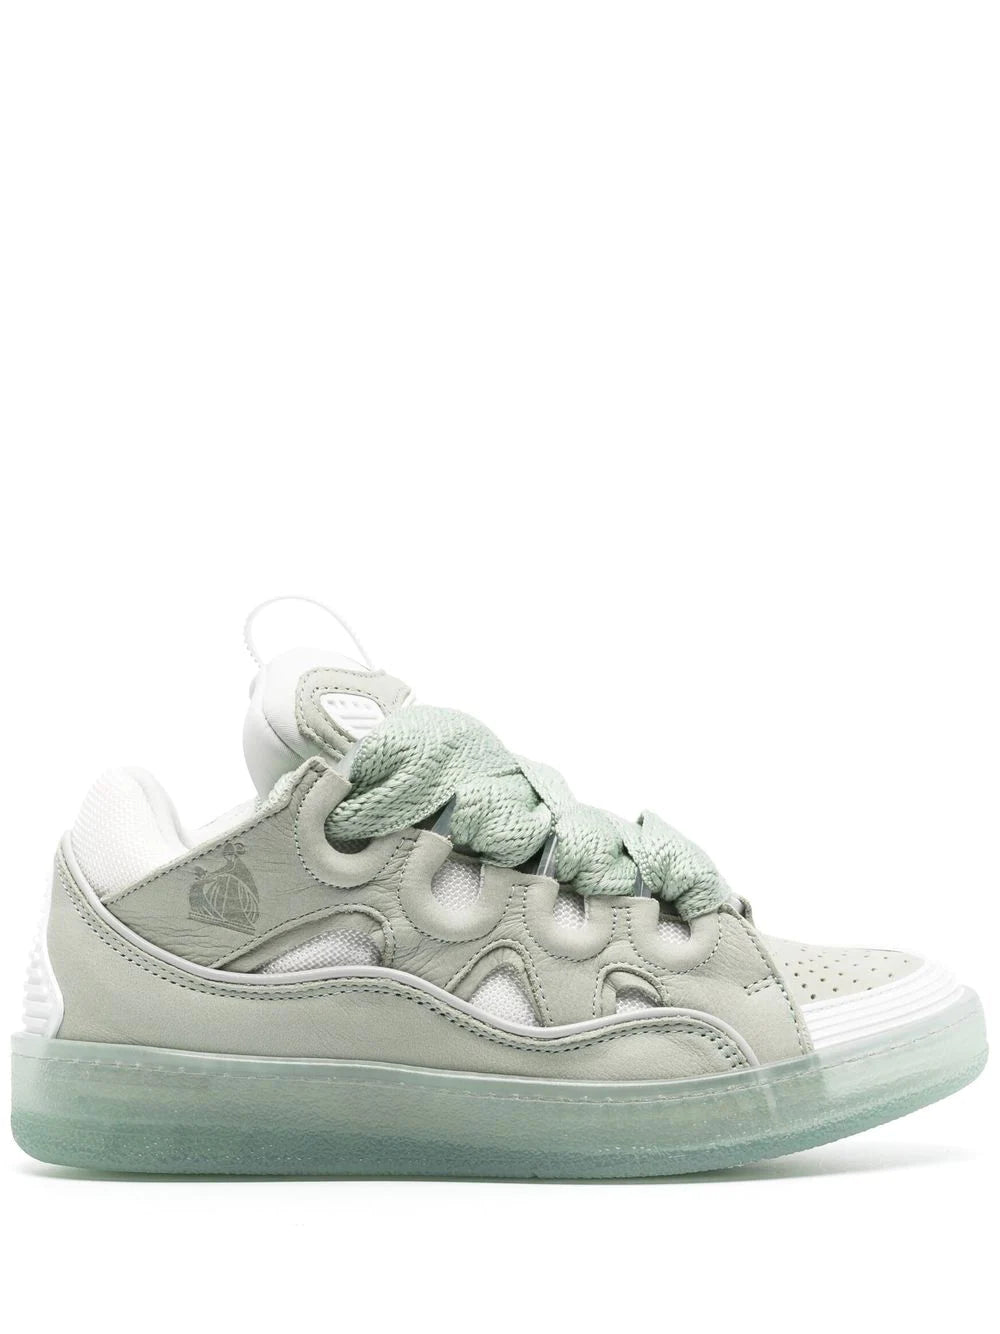 Lanvin Curb Sneaker Green (PreOwned)